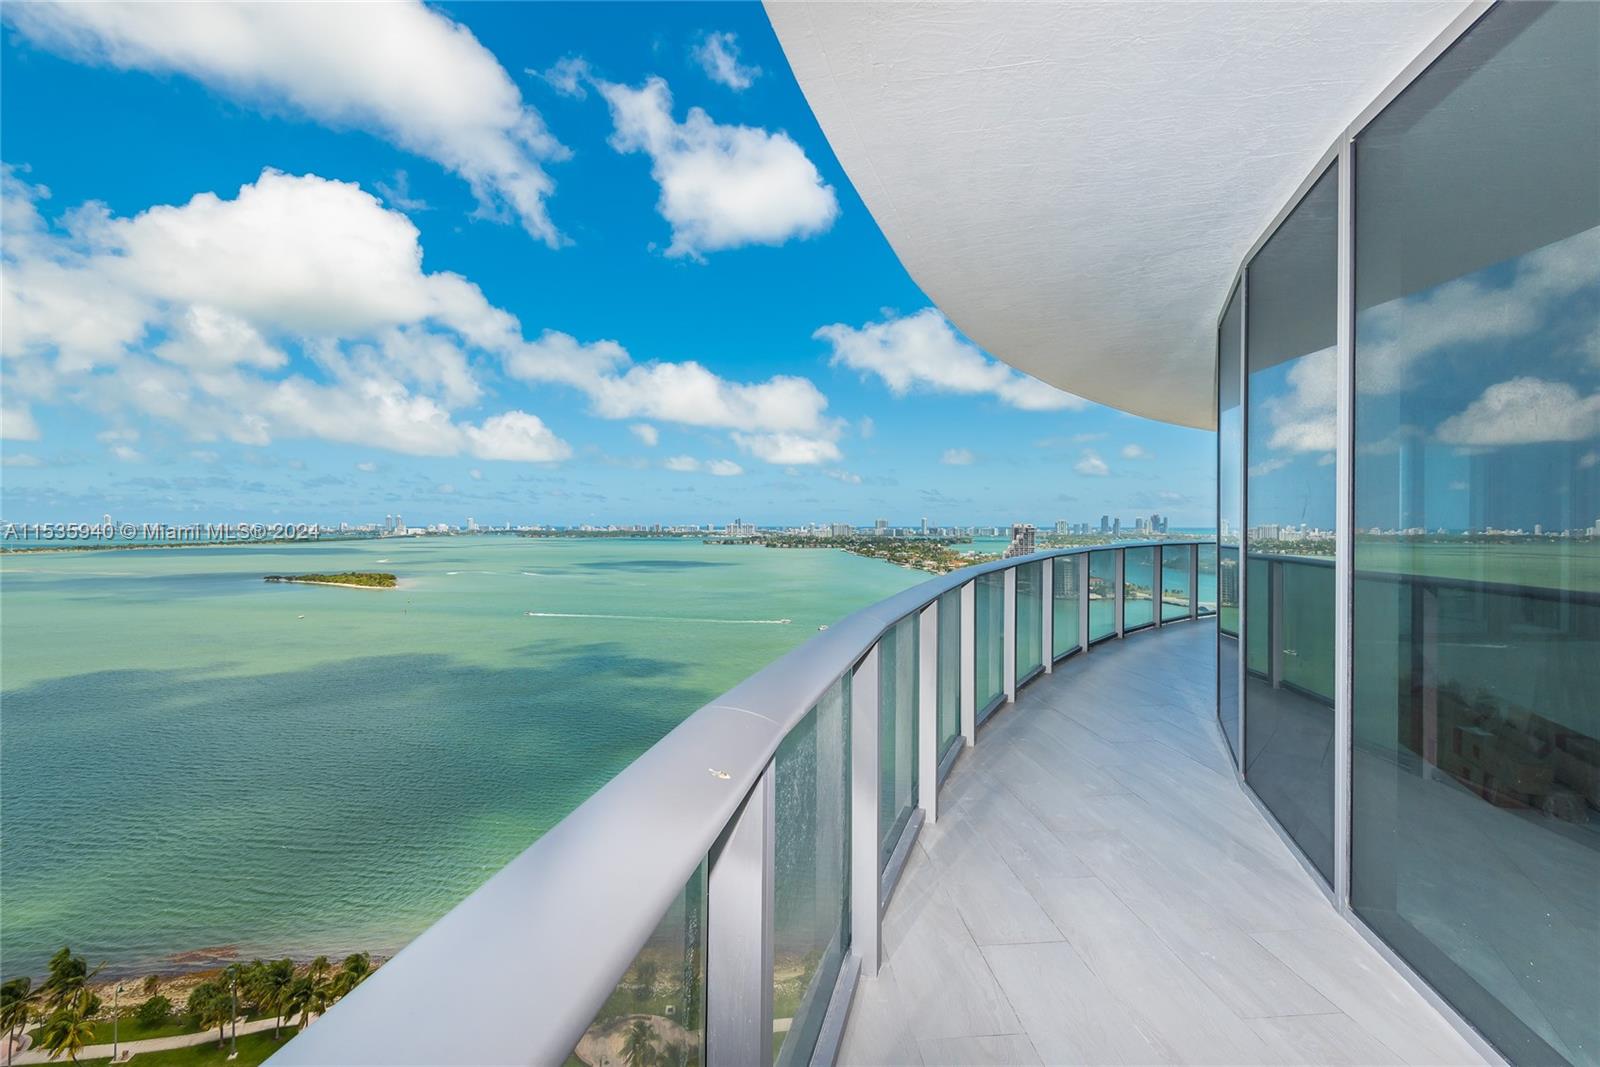 Live in luxury!!! Gorgeous and spacious unit with spectacular direct water views located in the heart of Miami's Art and Entertainment District. This 3 bedroom/ 4 full bathroom condo with DEN has top of the line finishes and appliances. All bedrooms have on suite bathrooms and custom closets. This unit features floor to ceiling windows with motorized window treatment throughout with blockout in the bedrooms and wrap around balcony. One of the BEST LINES in the building.